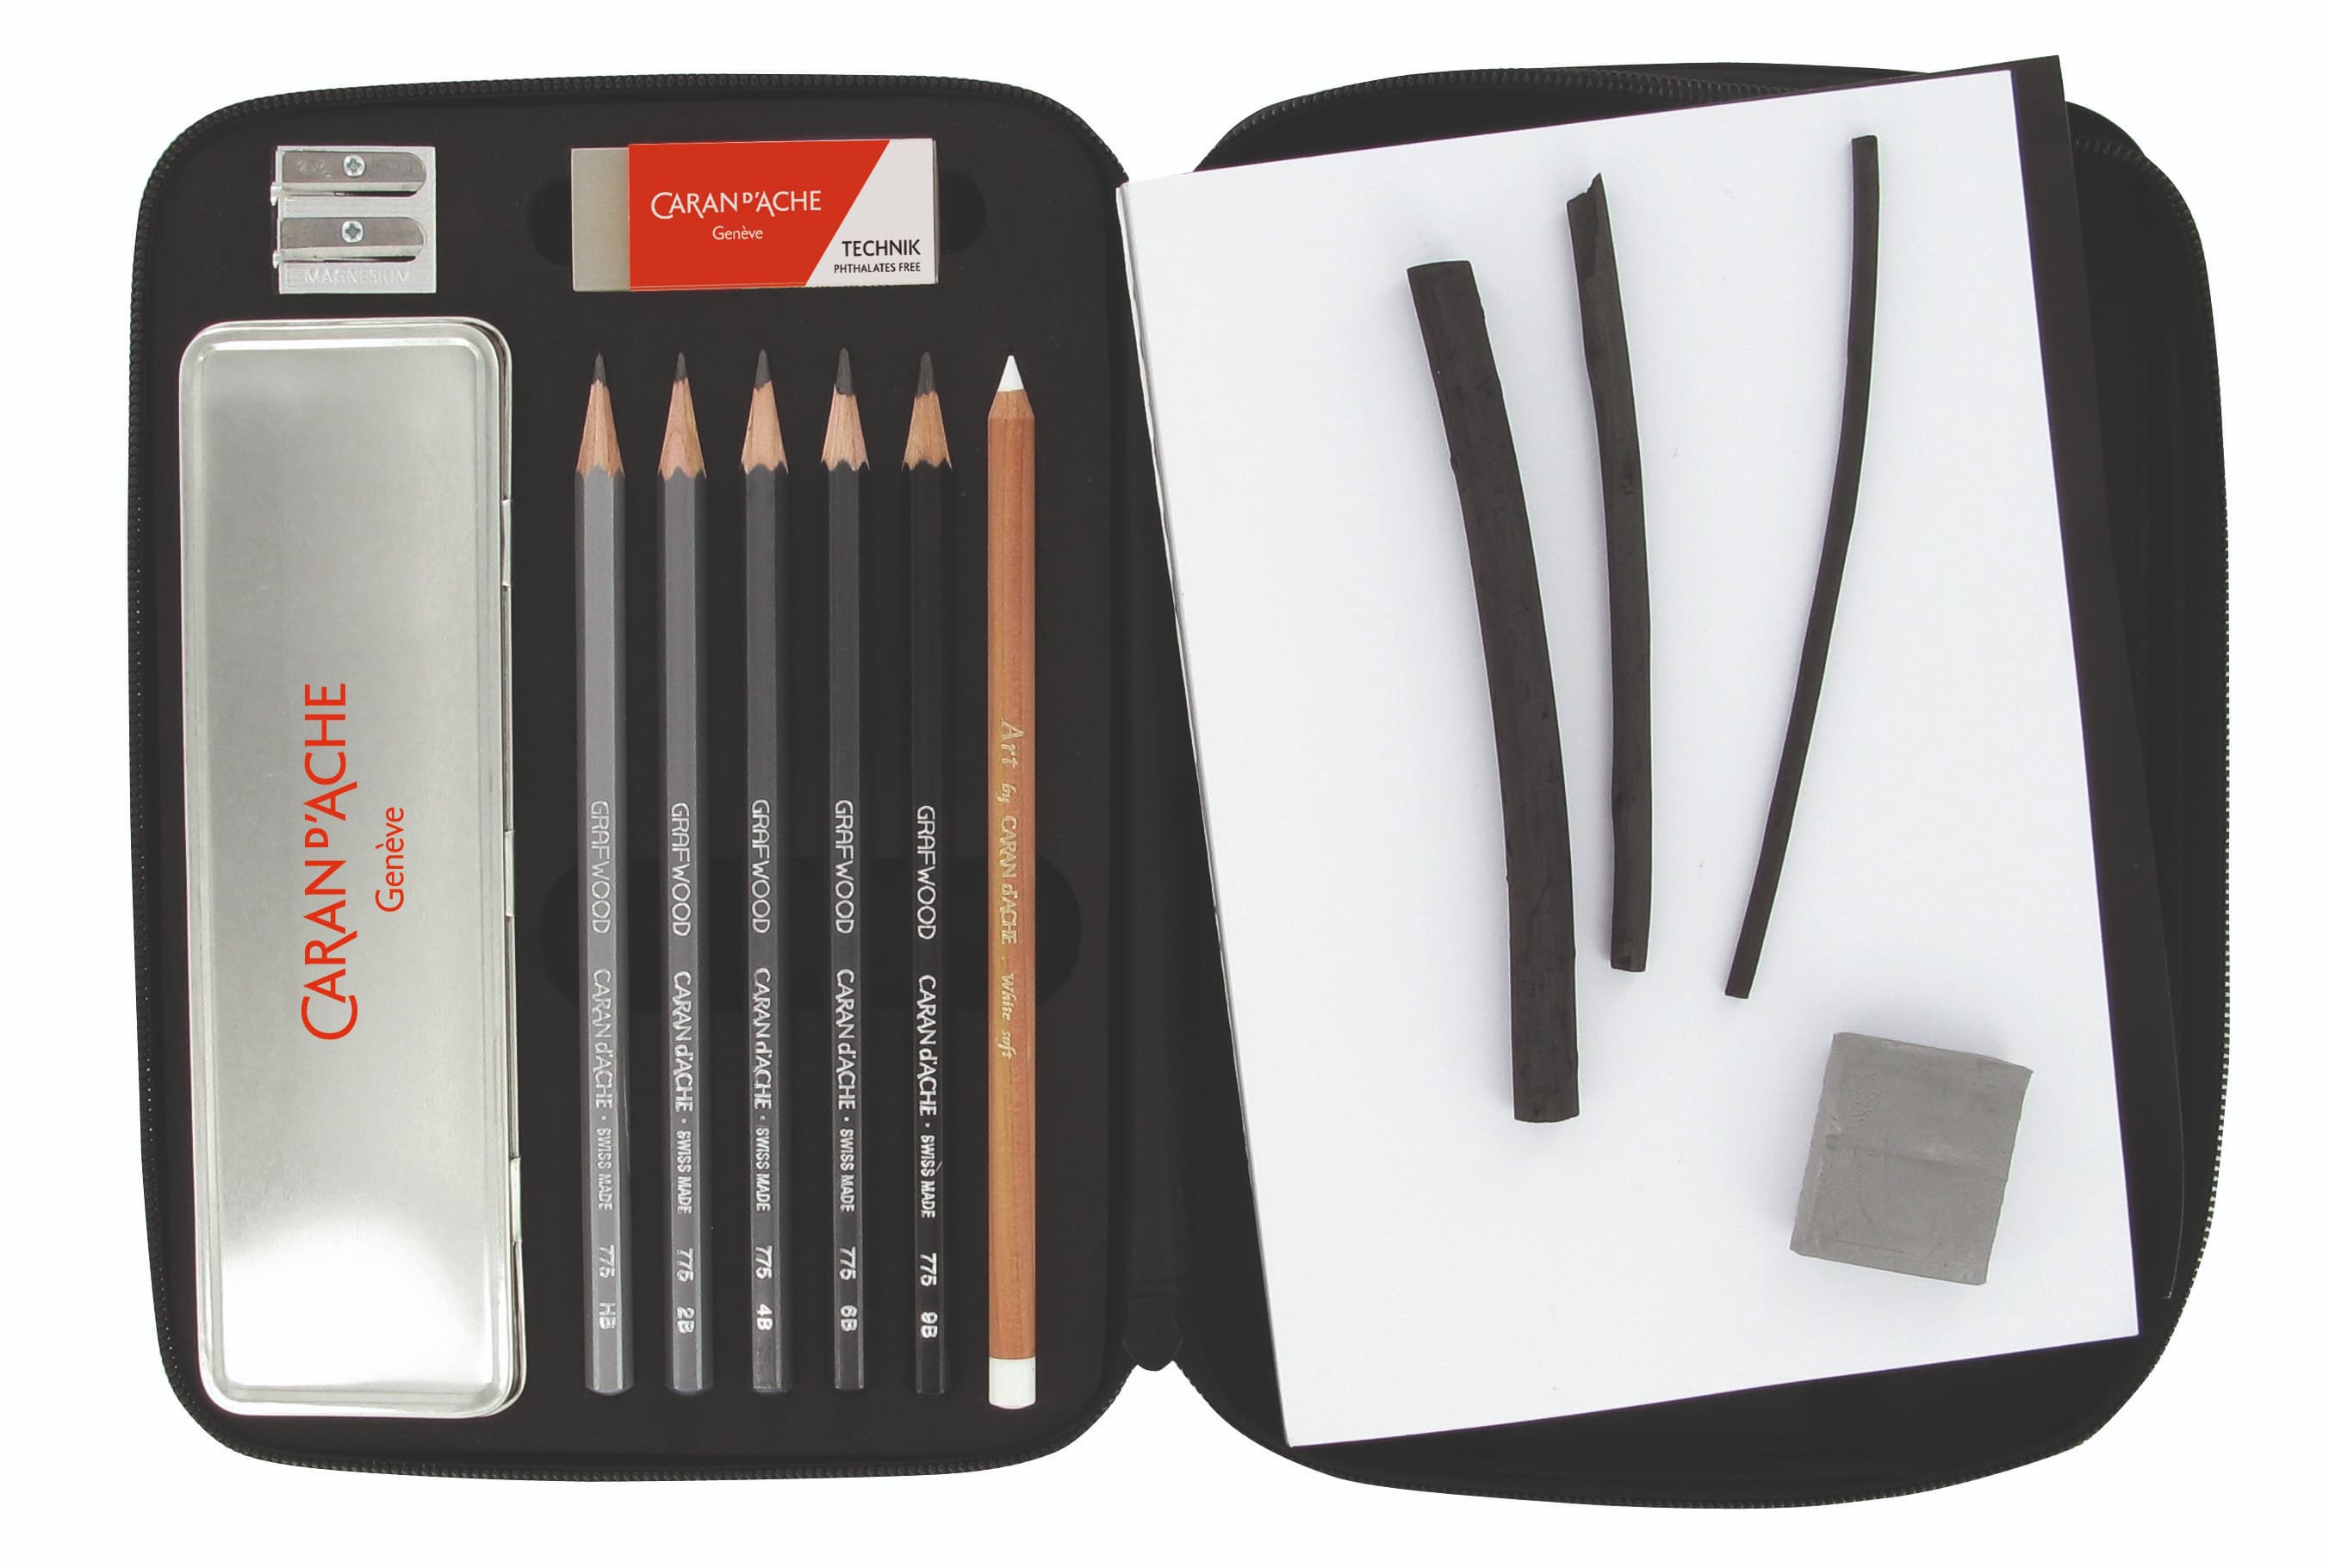 15 Essential Tools for Drawing | Artsy